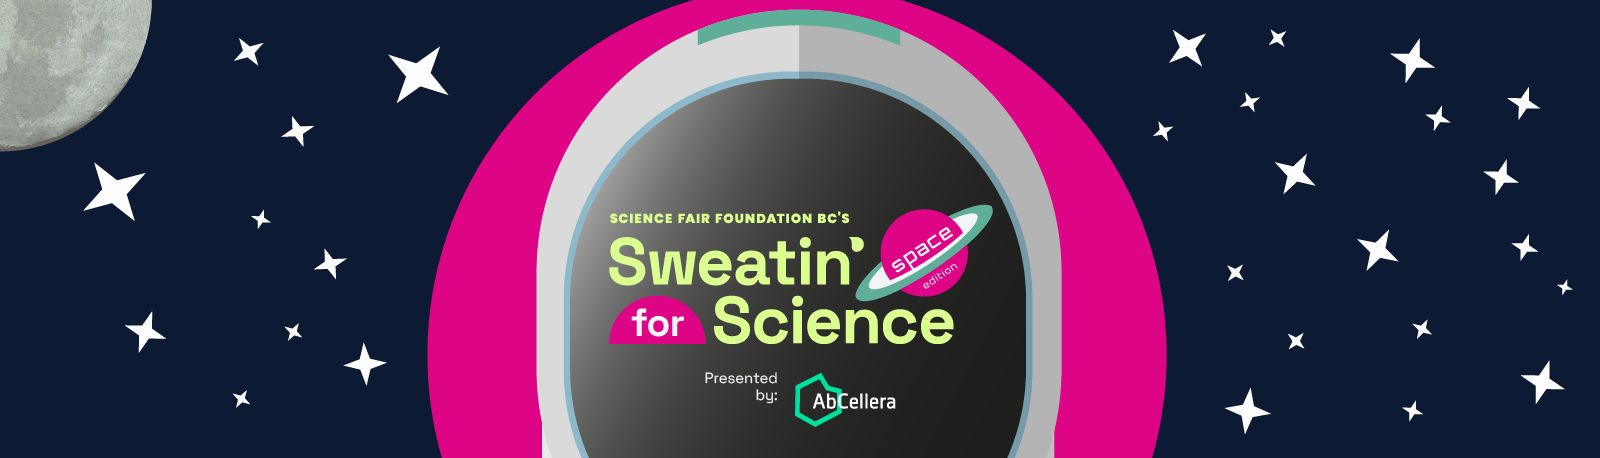 Sweatin' for Science, Online Event